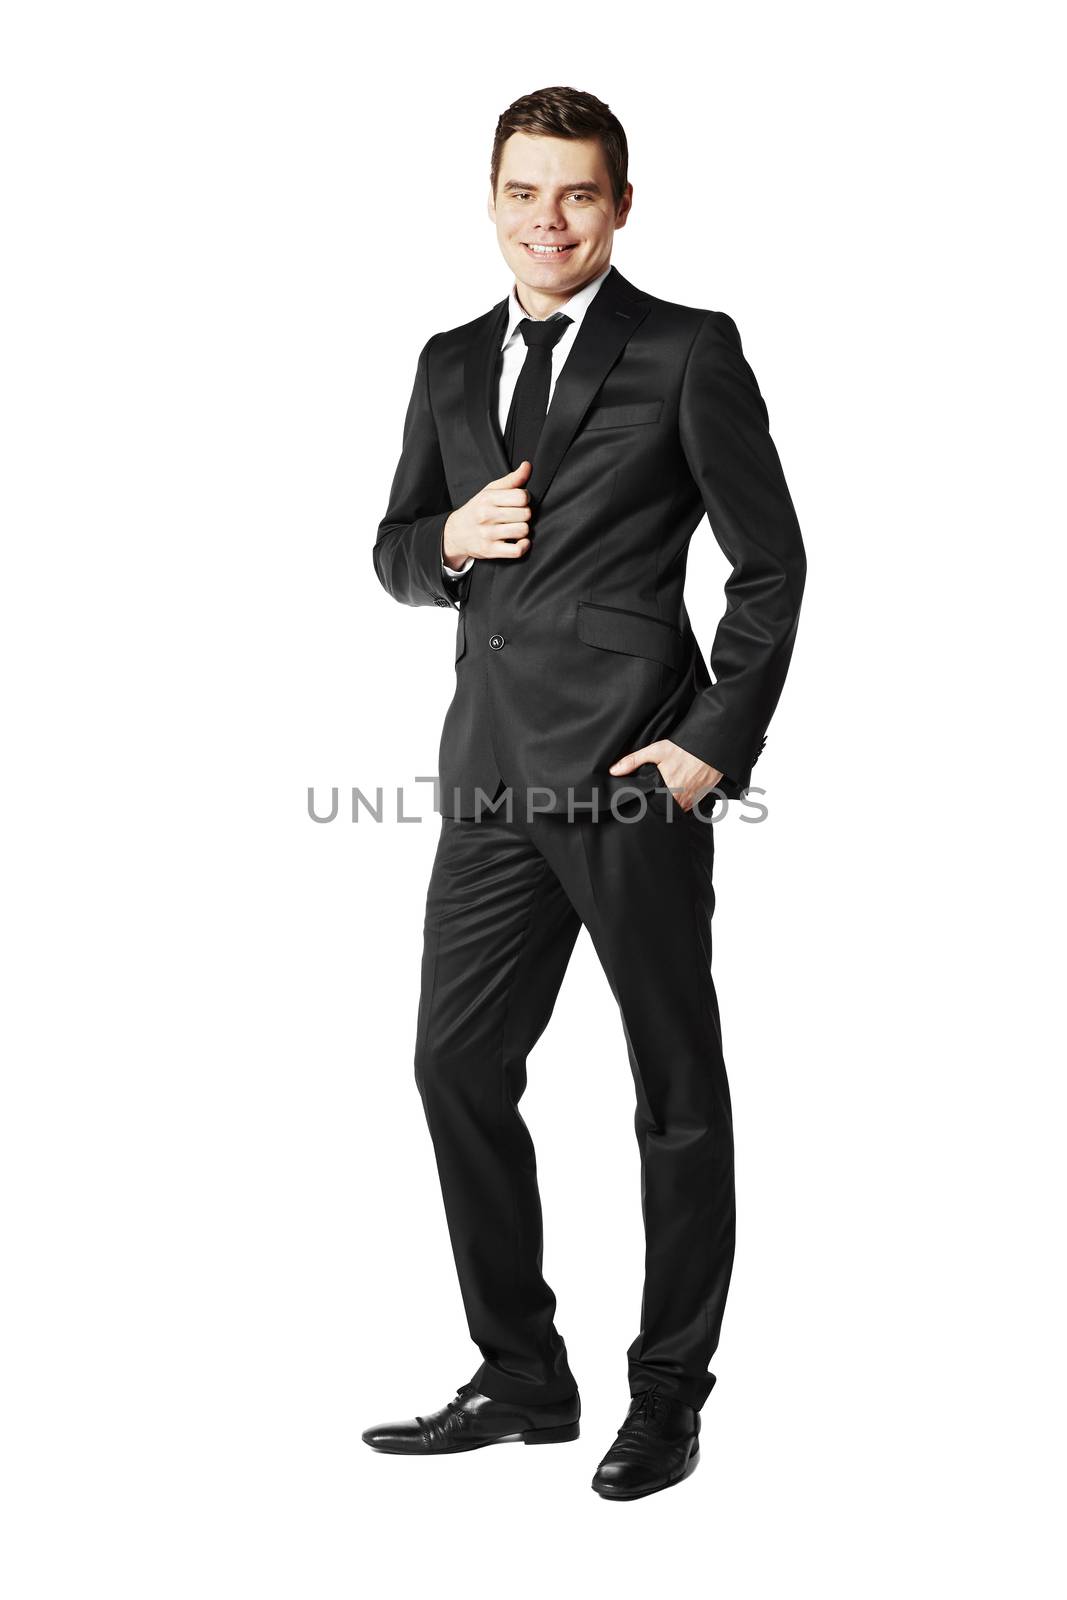 Young businessman against white background.